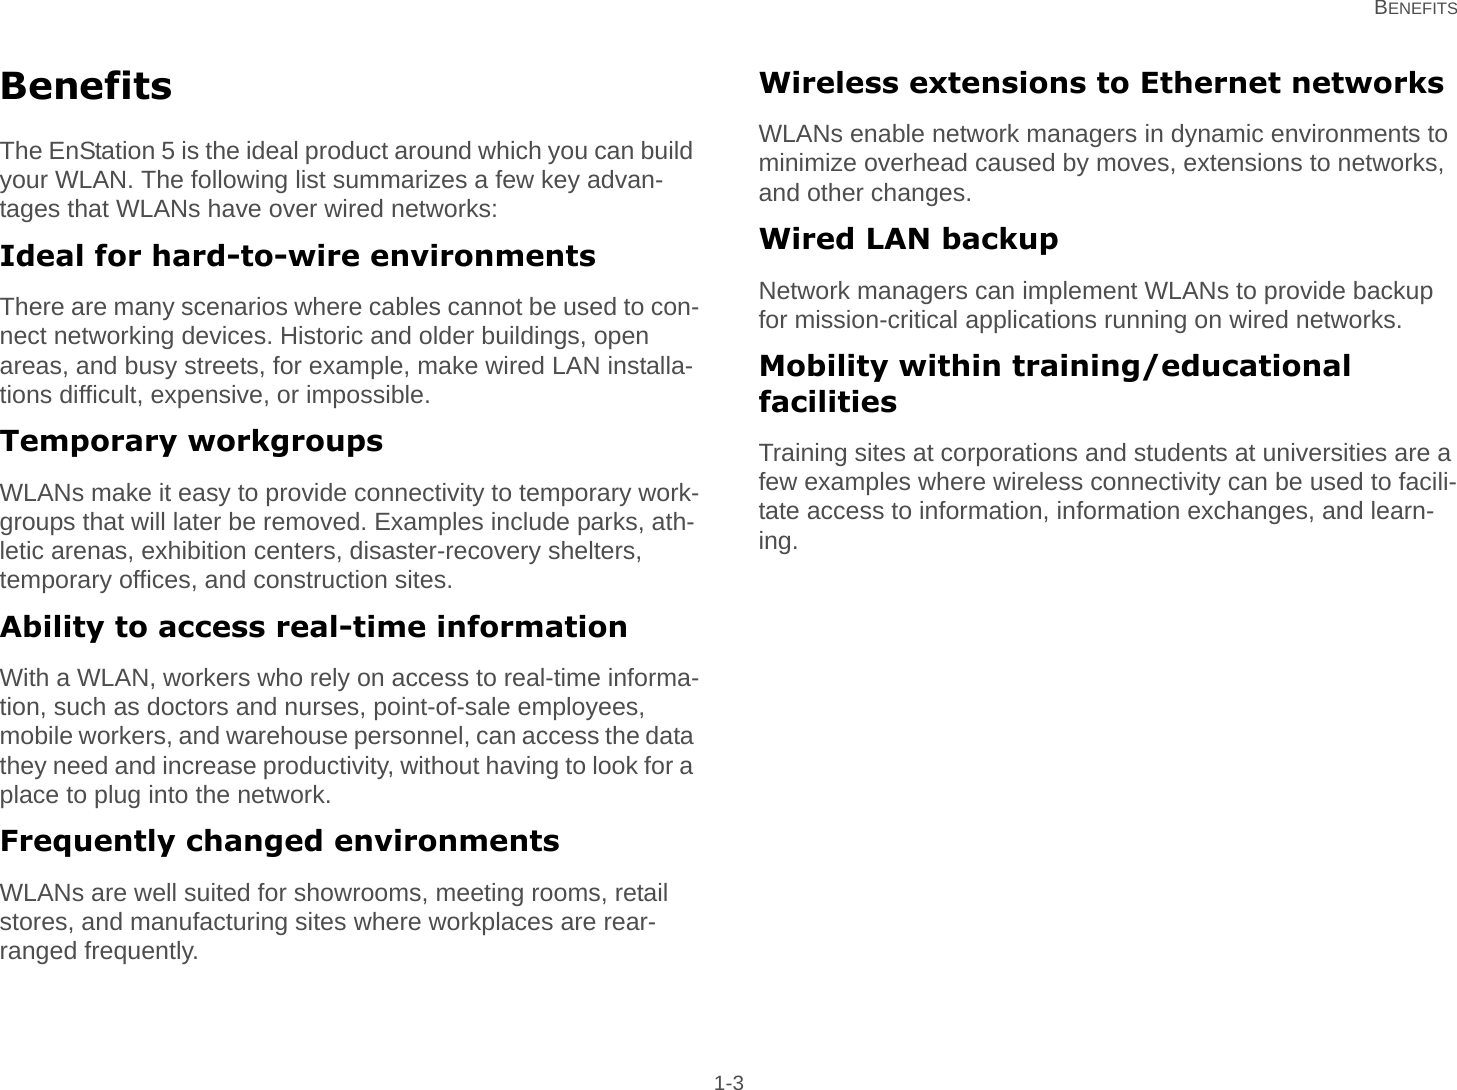   BENEFITS 1-3BenefitsThe EnStation 5 is the ideal product around which you can build your WLAN. The following list summarizes a few key advan-tages that WLANs have over wired networks:Ideal for hard-to-wire environmentsThere are many scenarios where cables cannot be used to con-nect networking devices. Historic and older buildings, open areas, and busy streets, for example, make wired LAN installa-tions difficult, expensive, or impossible.Temporary workgroupsWLANs make it easy to provide connectivity to temporary work-groups that will later be removed. Examples include parks, ath-letic arenas, exhibition centers, disaster-recovery shelters, temporary offices, and construction sites.Ability to access real-time informationWith a WLAN, workers who rely on access to real-time informa-tion, such as doctors and nurses, point-of-sale employees, mobile workers, and warehouse personnel, can access the data they need and increase productivity, without having to look for a place to plug into the network.Frequently changed environmentsWLANs are well suited for showrooms, meeting rooms, retail stores, and manufacturing sites where workplaces are rear-ranged frequently.Wireless extensions to Ethernet networksWLANs enable network managers in dynamic environments to minimize overhead caused by moves, extensions to networks, and other changes.Wired LAN backupNetwork managers can implement WLANs to provide backup for mission-critical applications running on wired networks.Mobility within training/educational facilitiesTraining sites at corporations and students at universities are a few examples where wireless connectivity can be used to facili-tate access to information, information exchanges, and learn-ing.